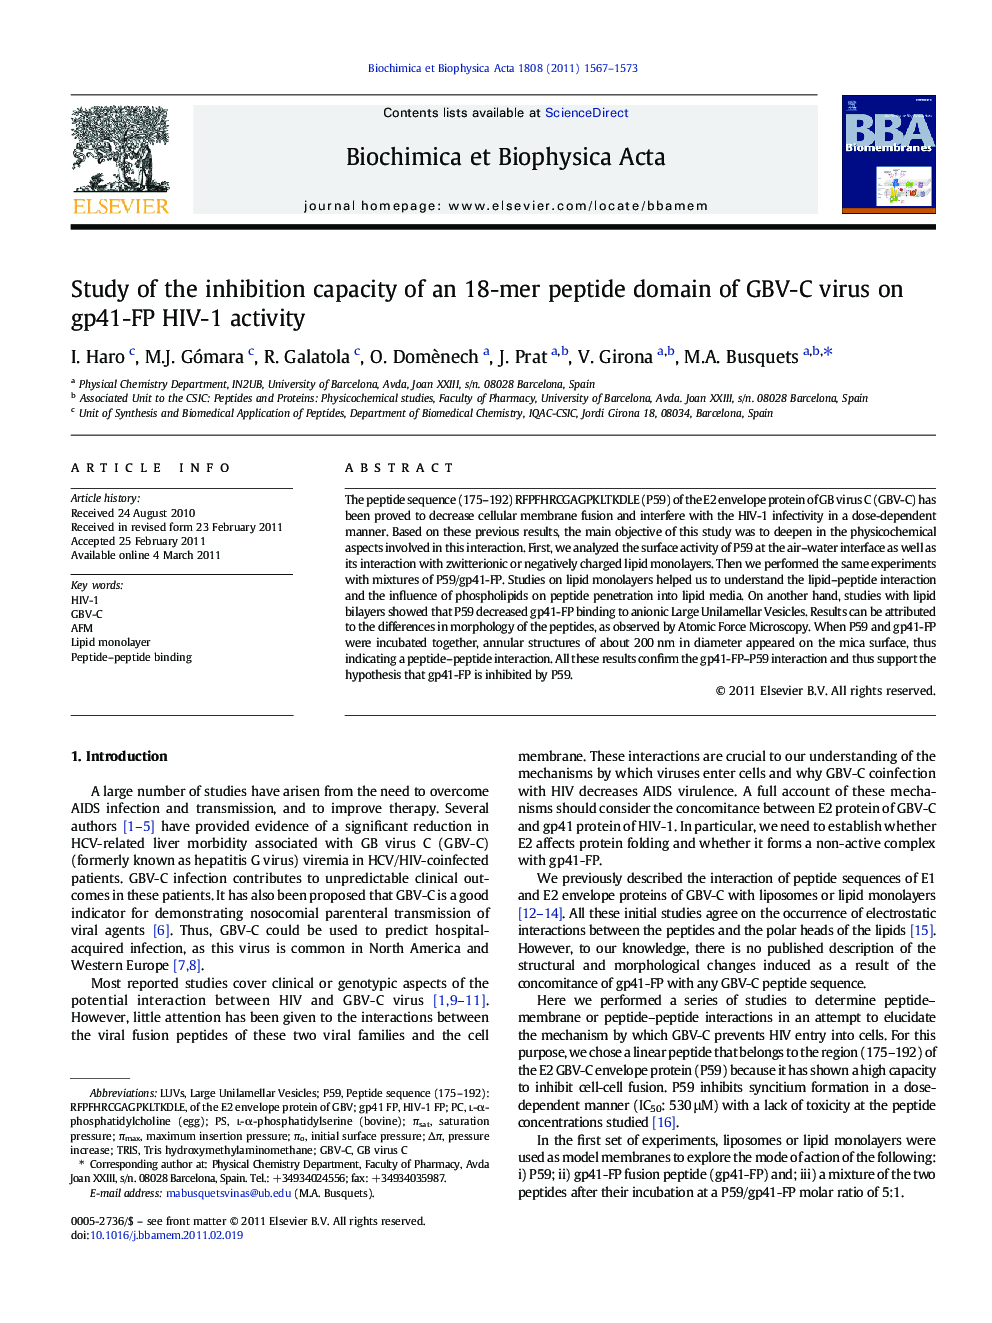 Study of the inhibition capacity of an 18-mer peptide domain of GBV-C virus on gp41-FP HIV-1 activity